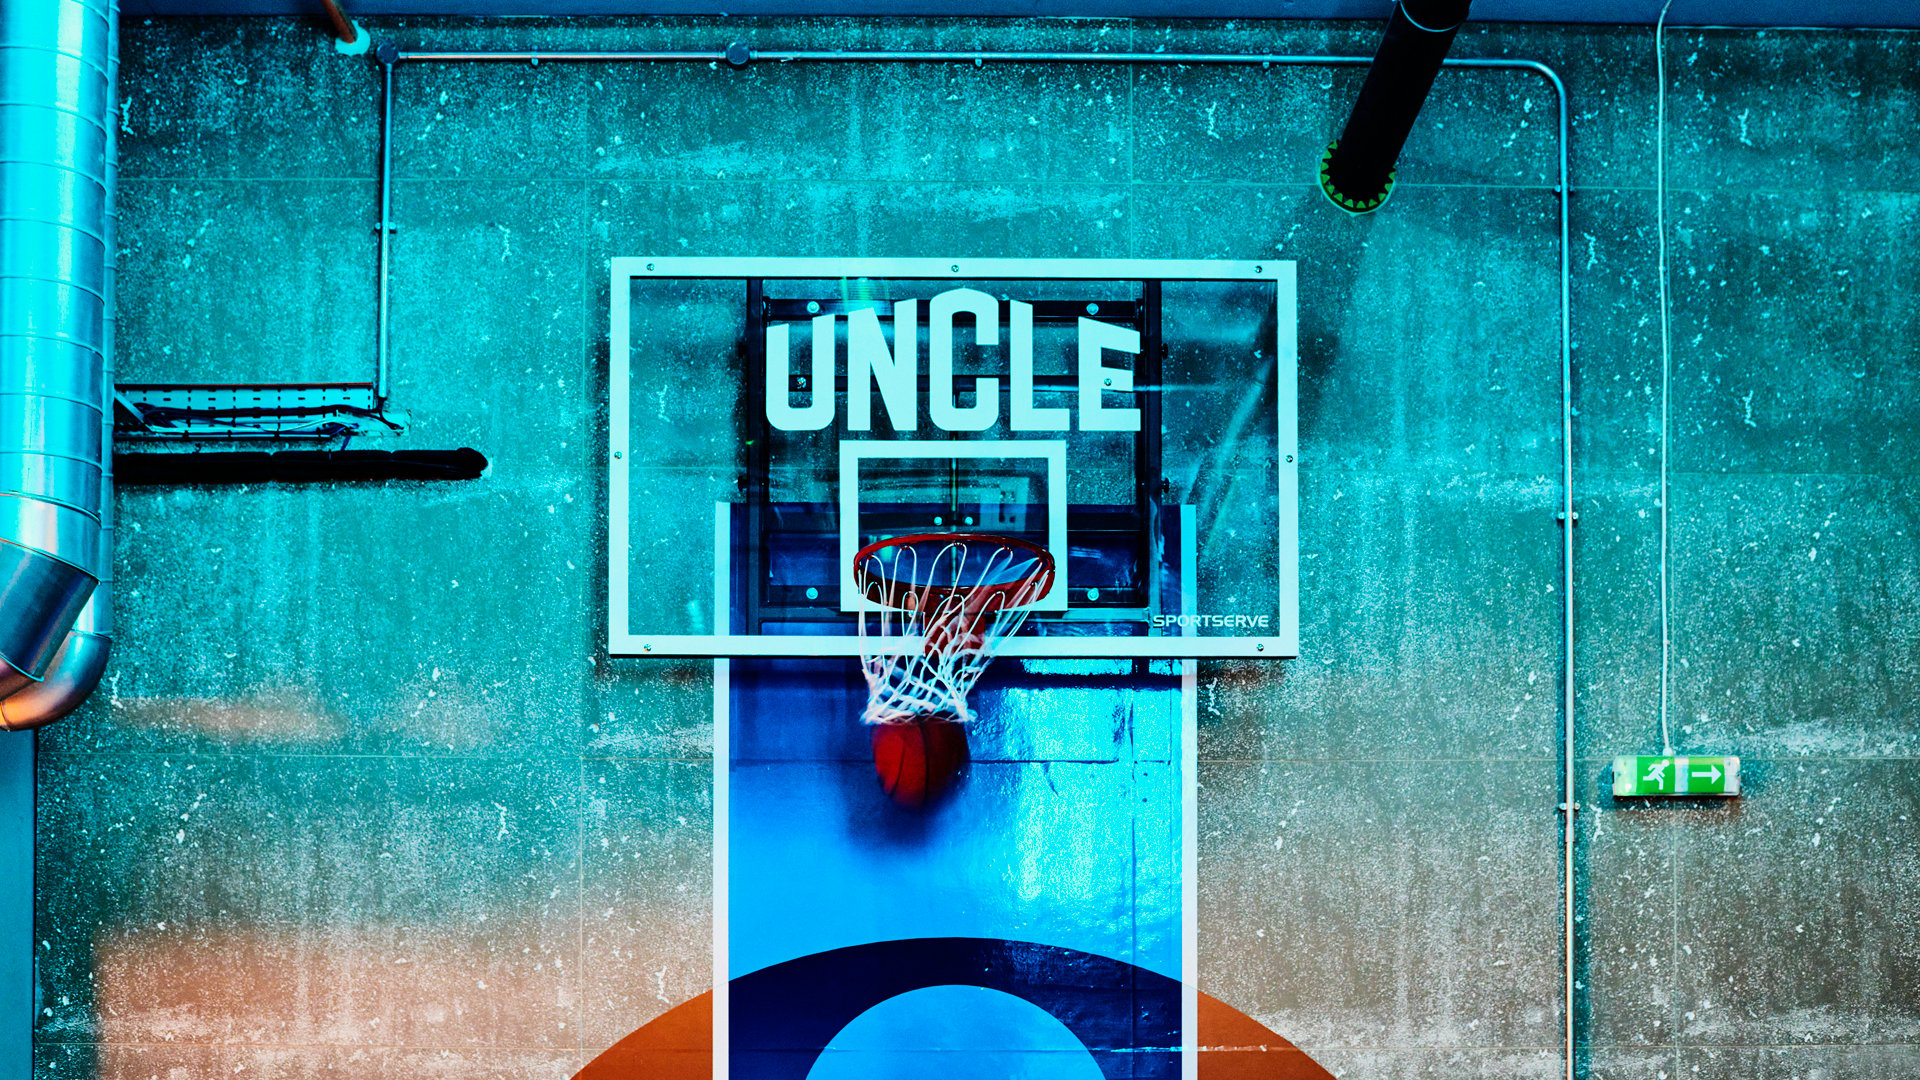 UNCLE Wembley basketball court